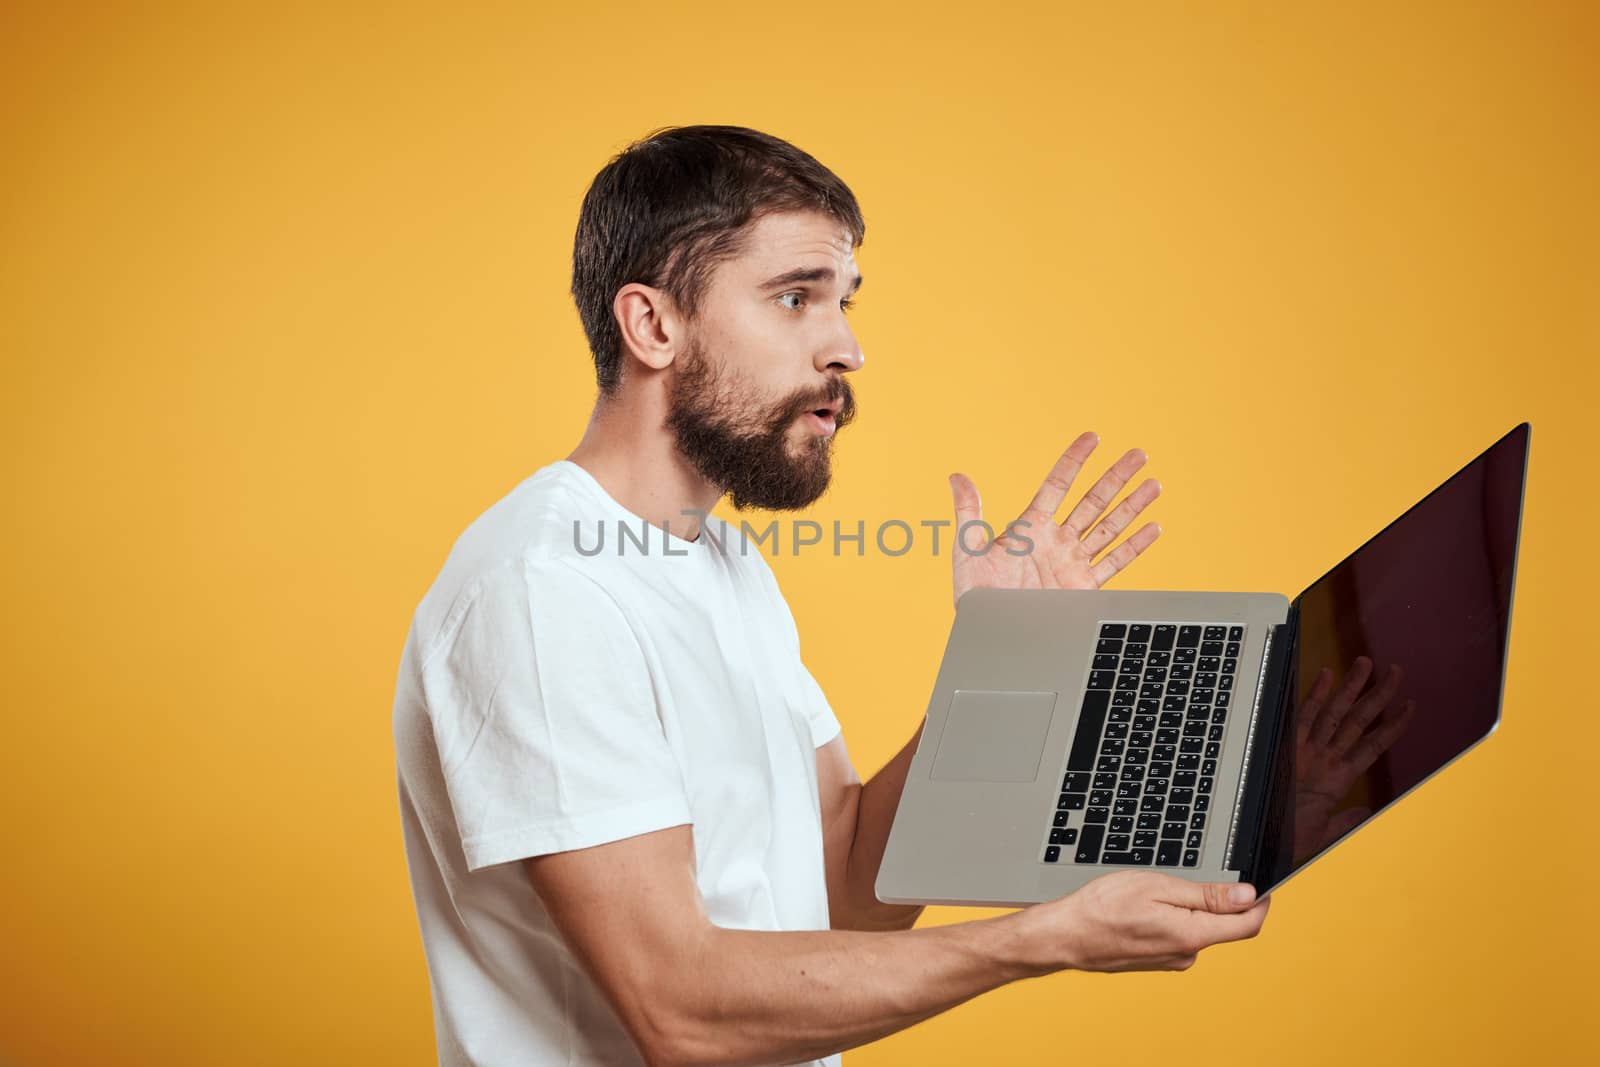 A man with a beard holds a laptop in his hand on a yellow background keyboard monitor new technologies side view by SHOTPRIME